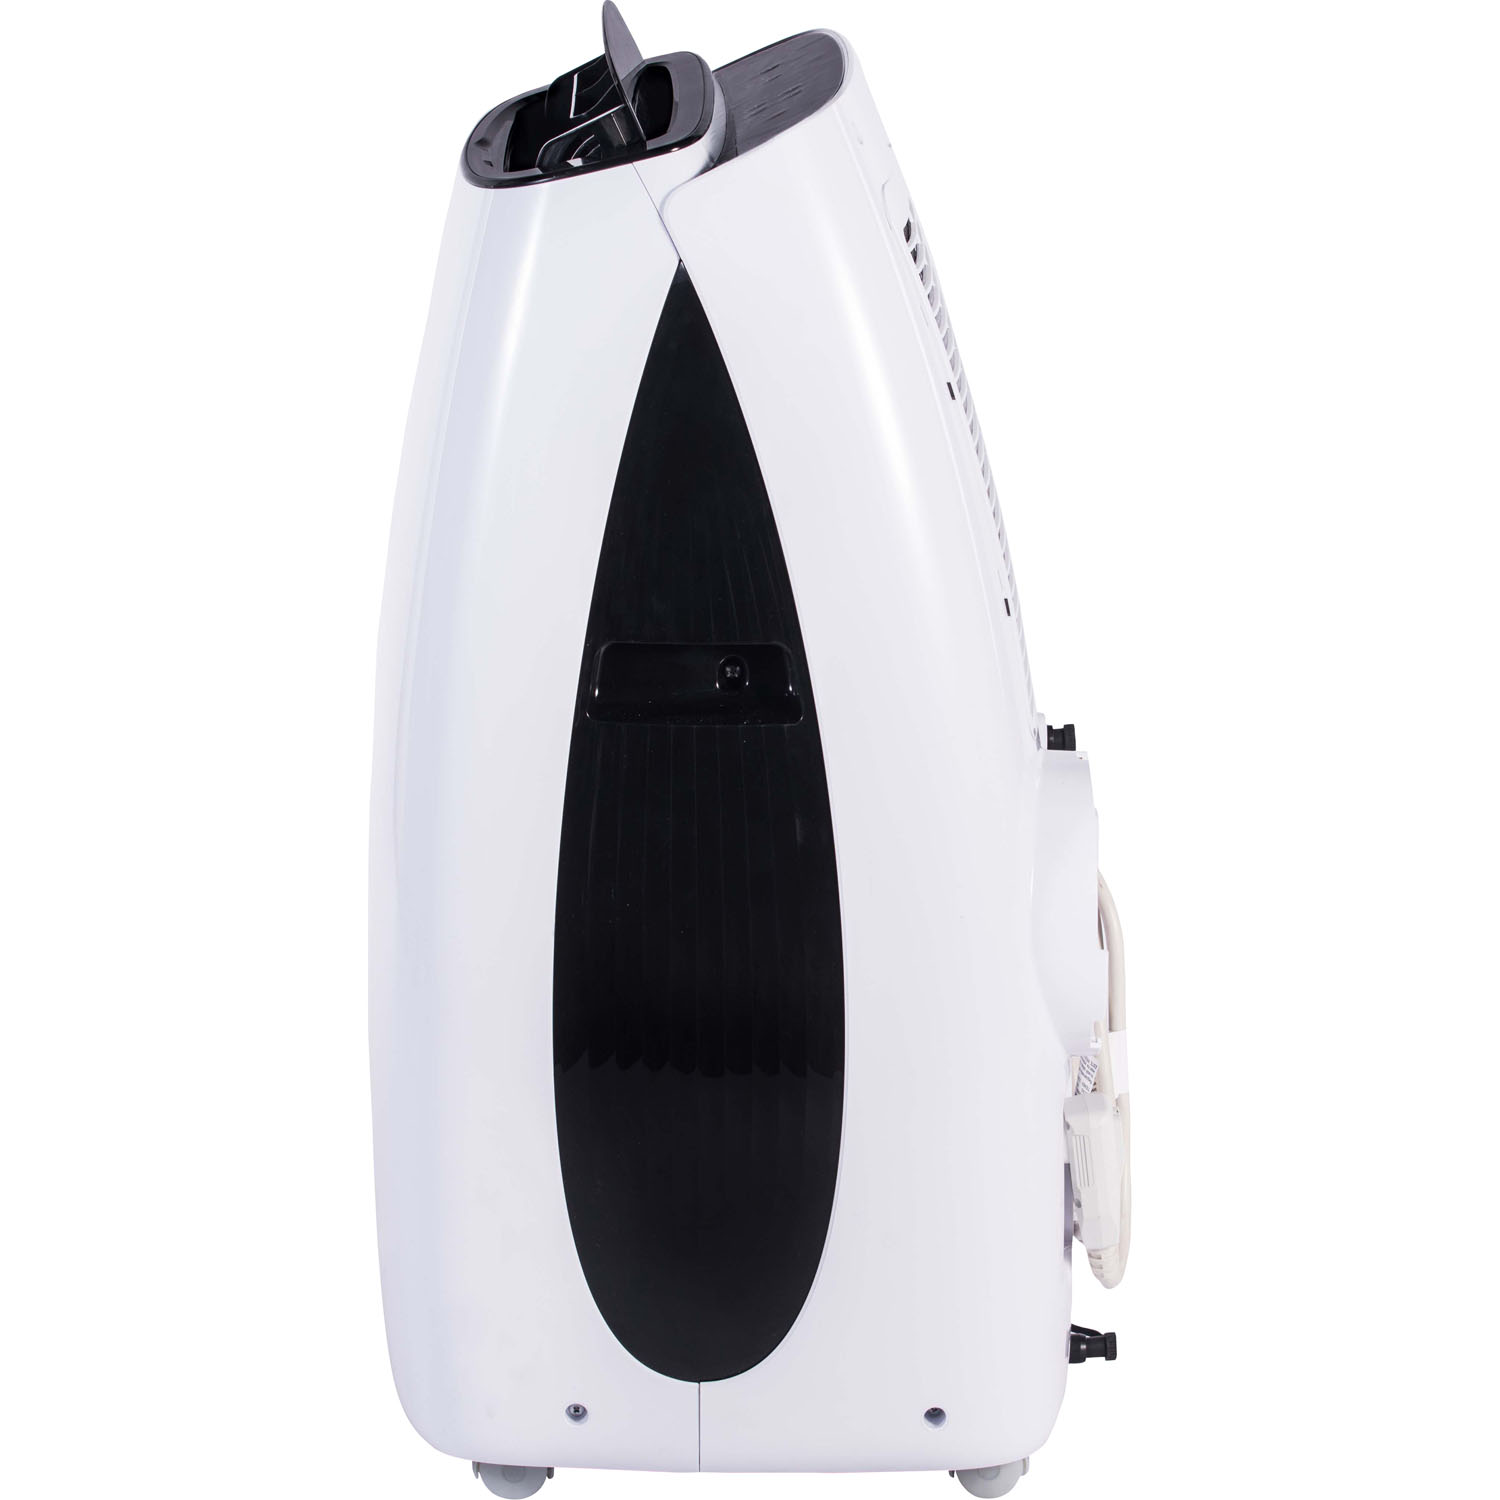 Quilo Portable Air Conditioner with Remote Control for a Room up to 550 Sq. Ft. - image 3 of 9